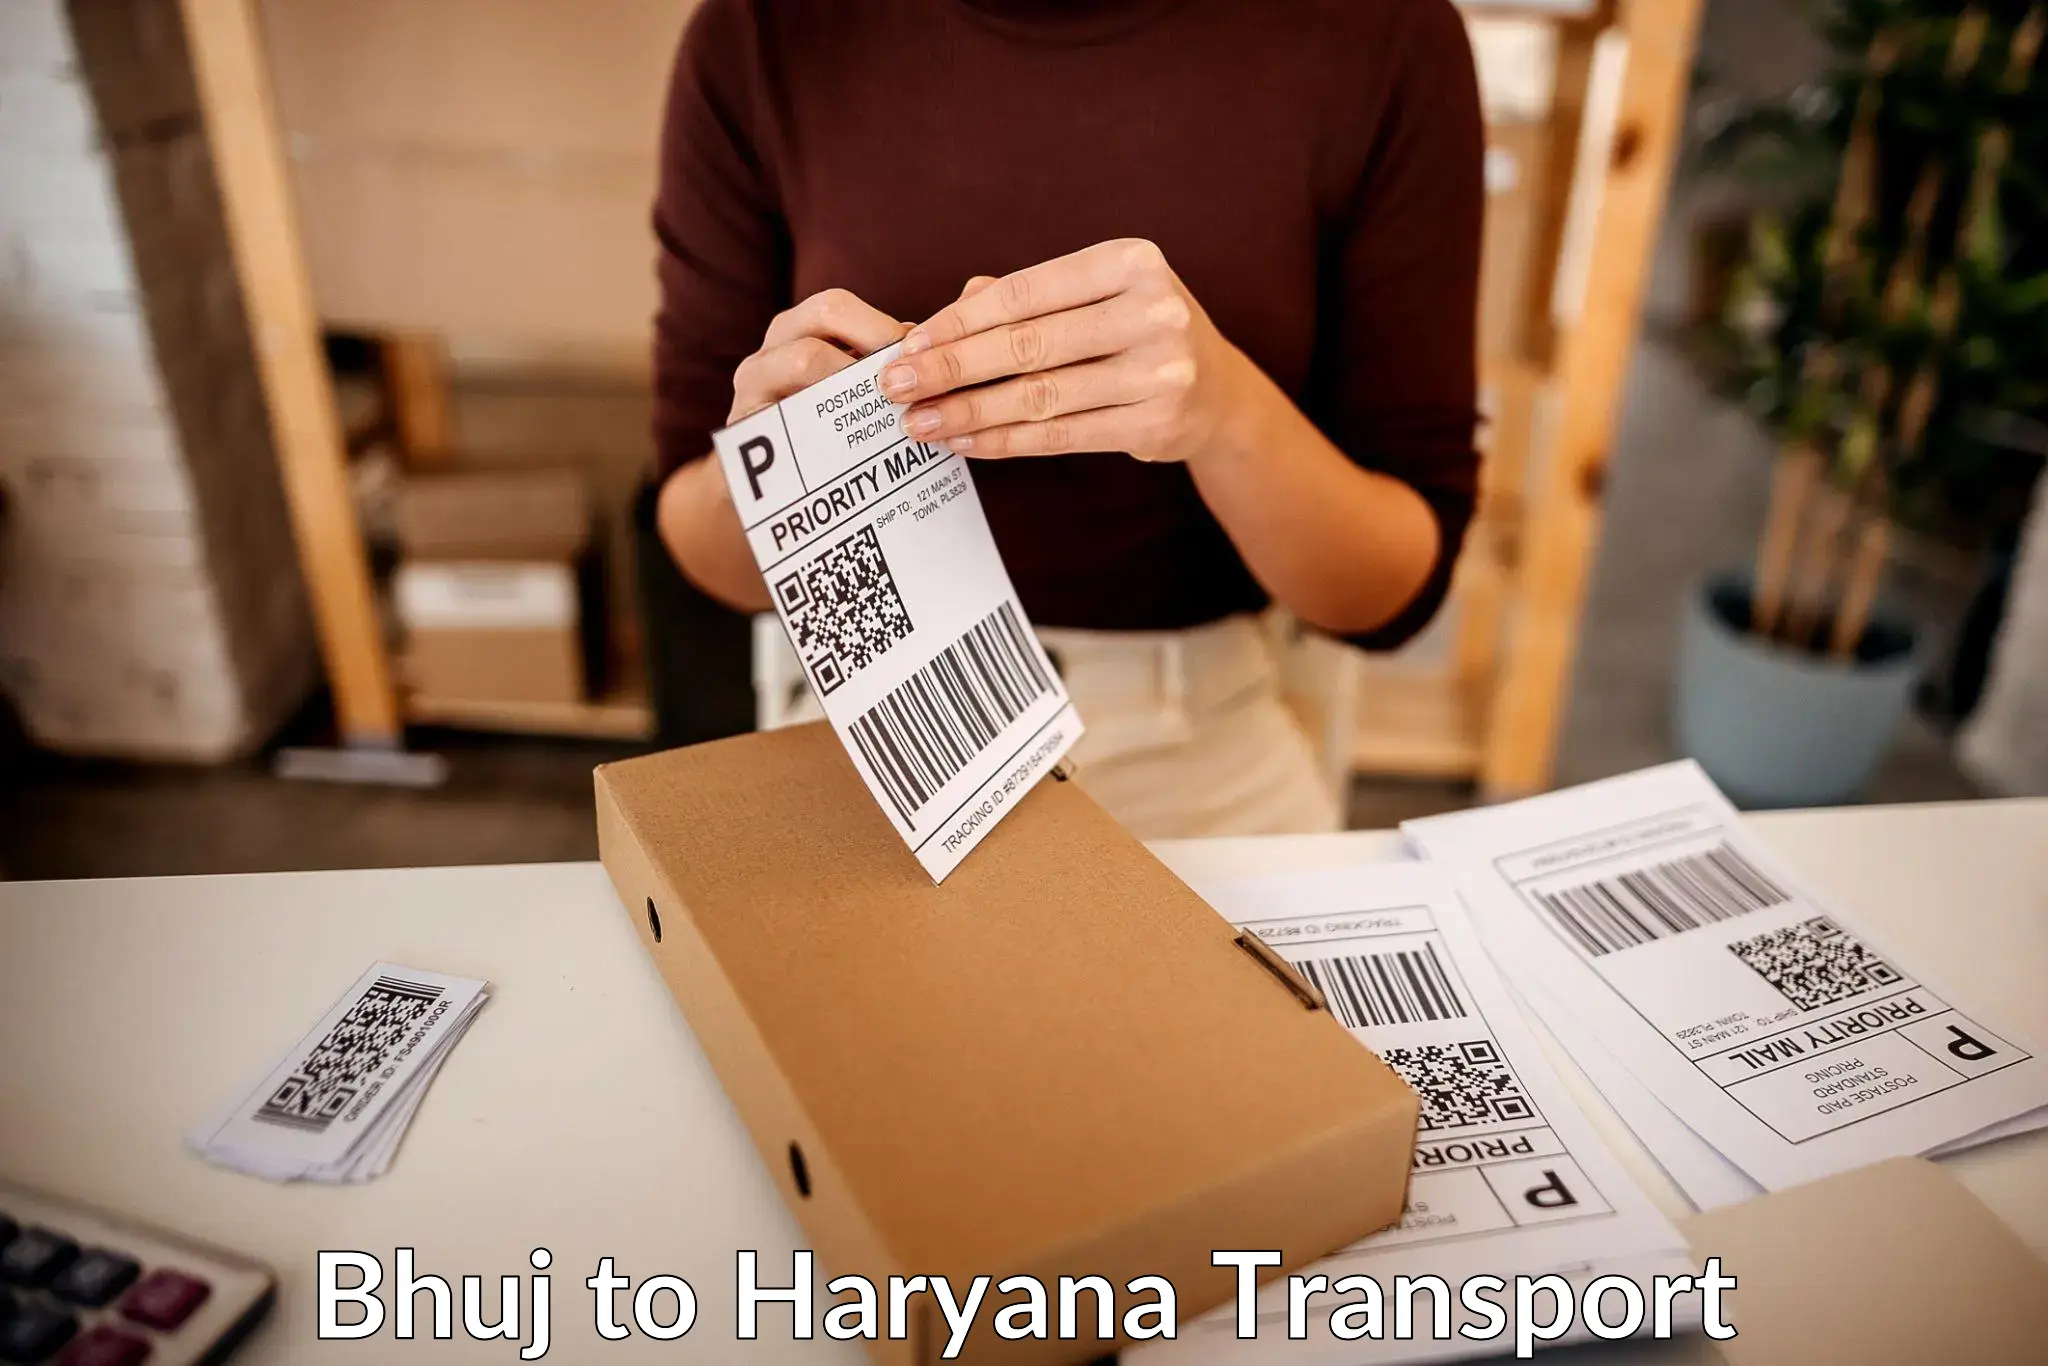 Container transport service Bhuj to Haryana